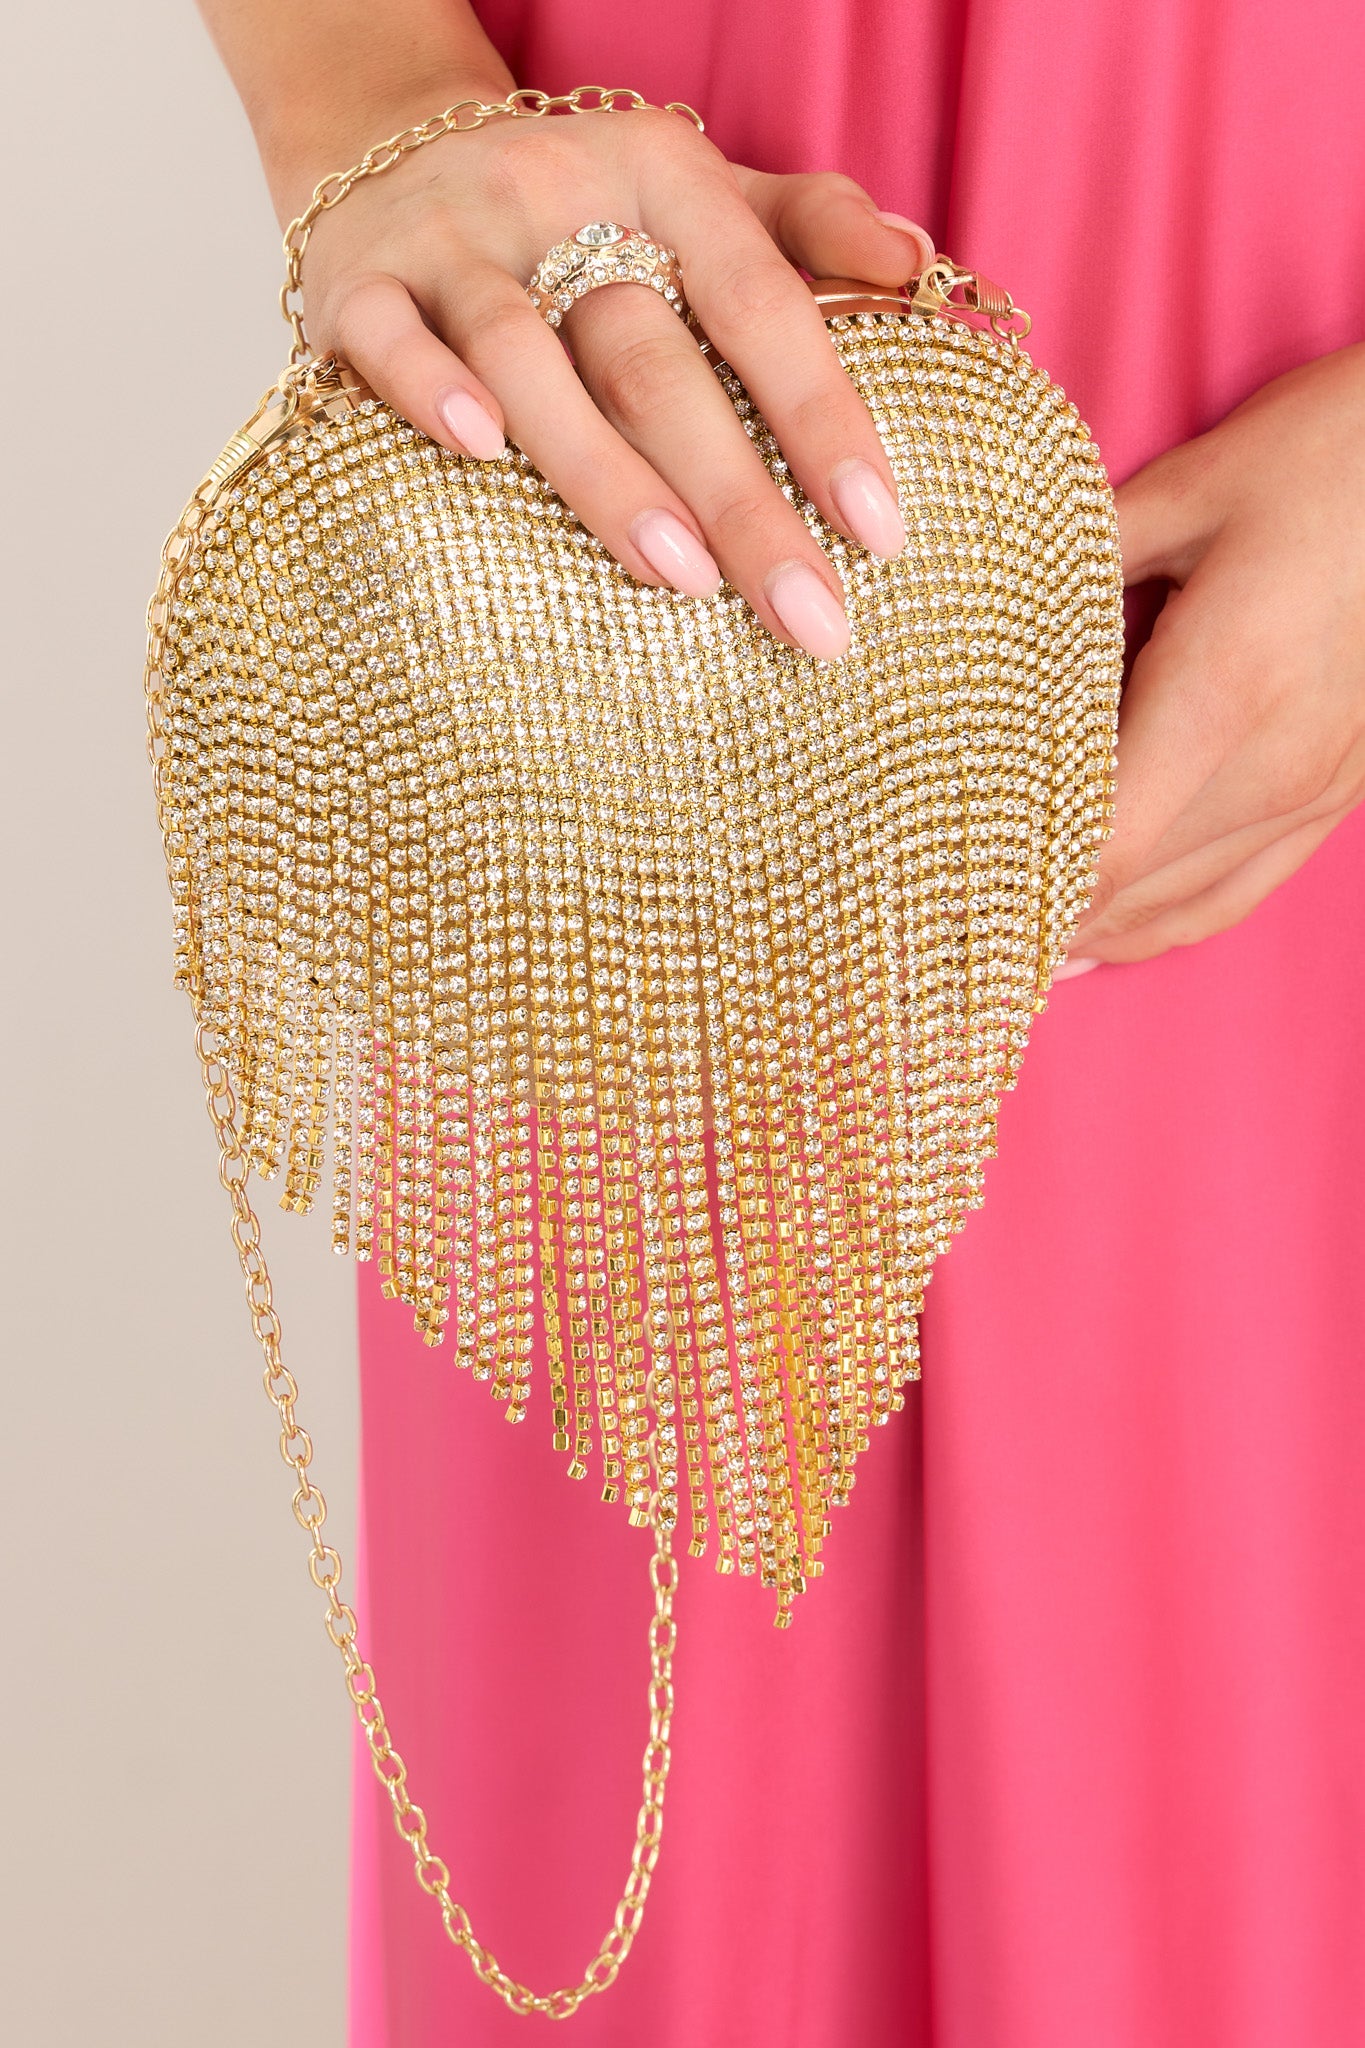 Close up view of this handbag that features gold hardware, rhinestone fringe, a removable chain strap, a ring like feature, and a snap closure.